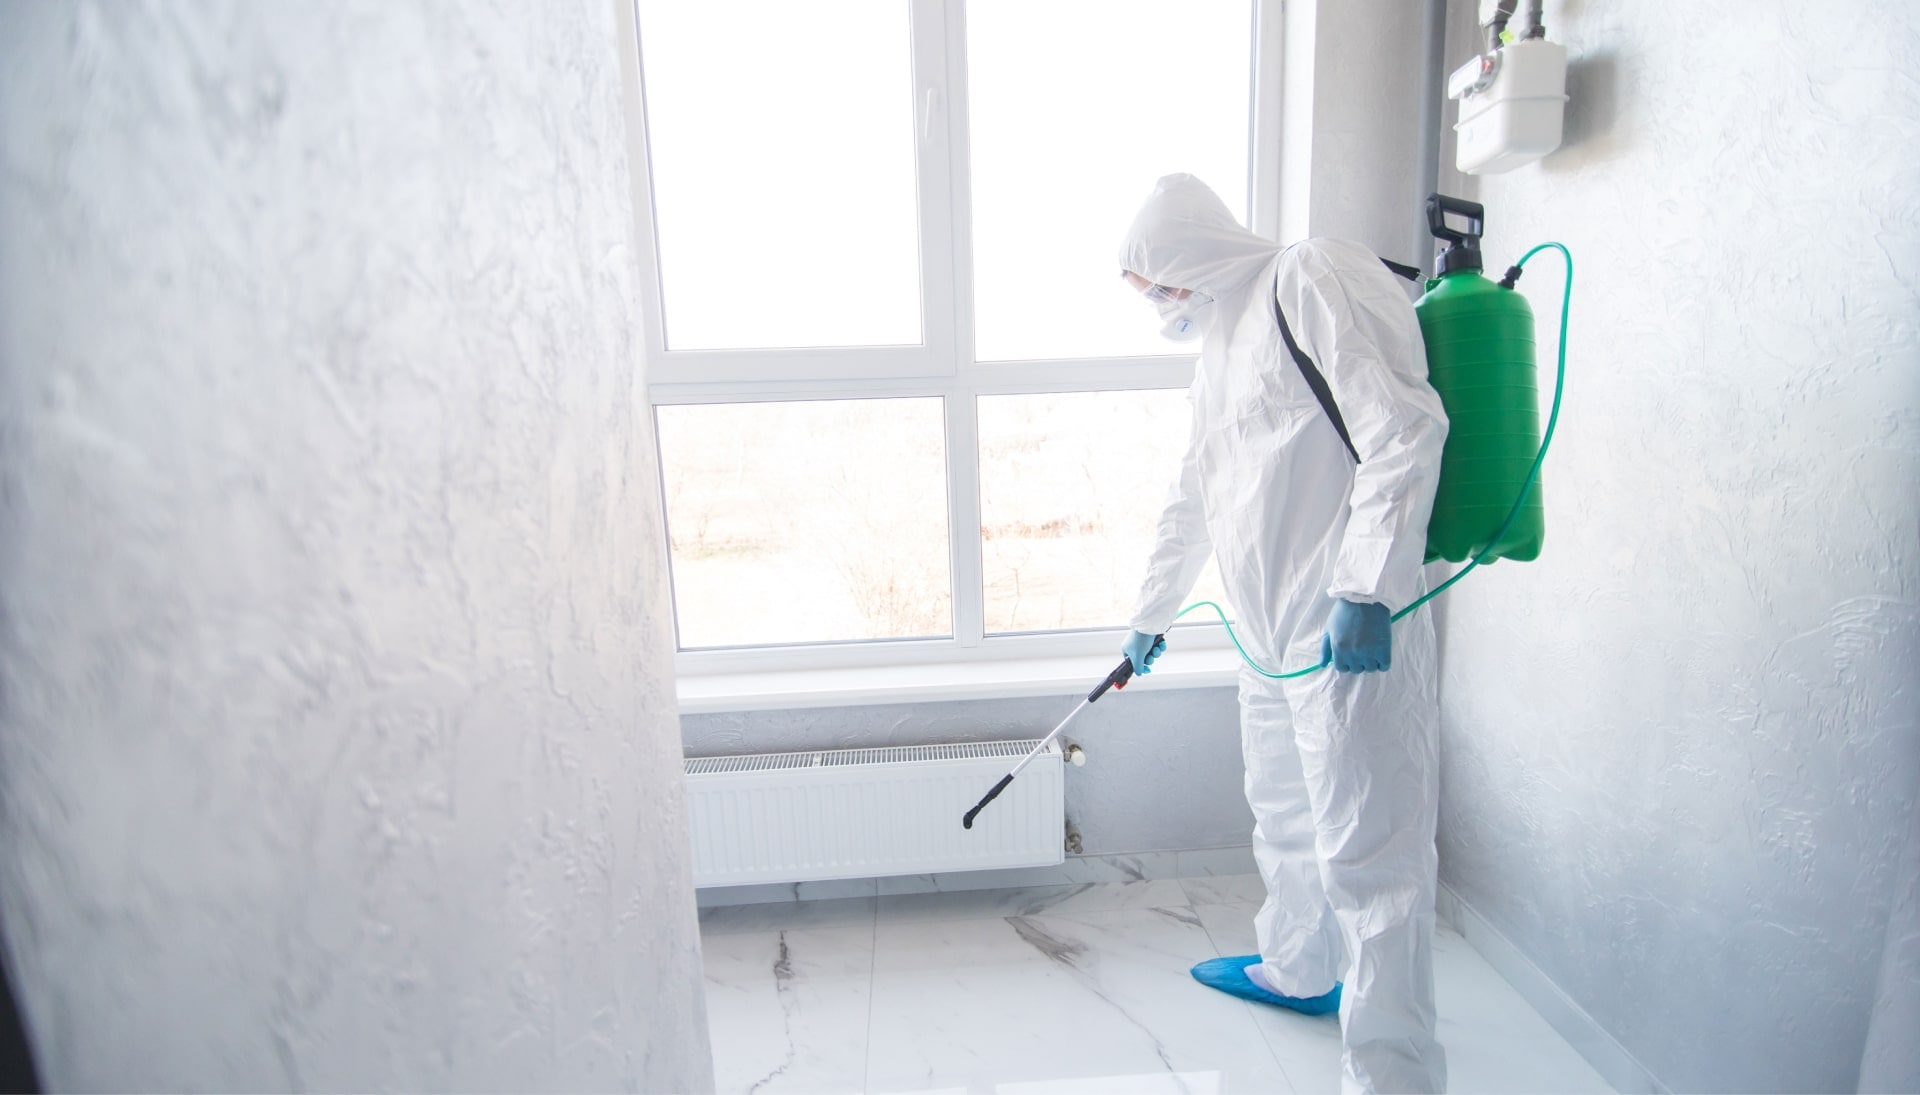 We provide the highest-quality mold inspection, testing, and removal services in the Jacksonville, Florida area.